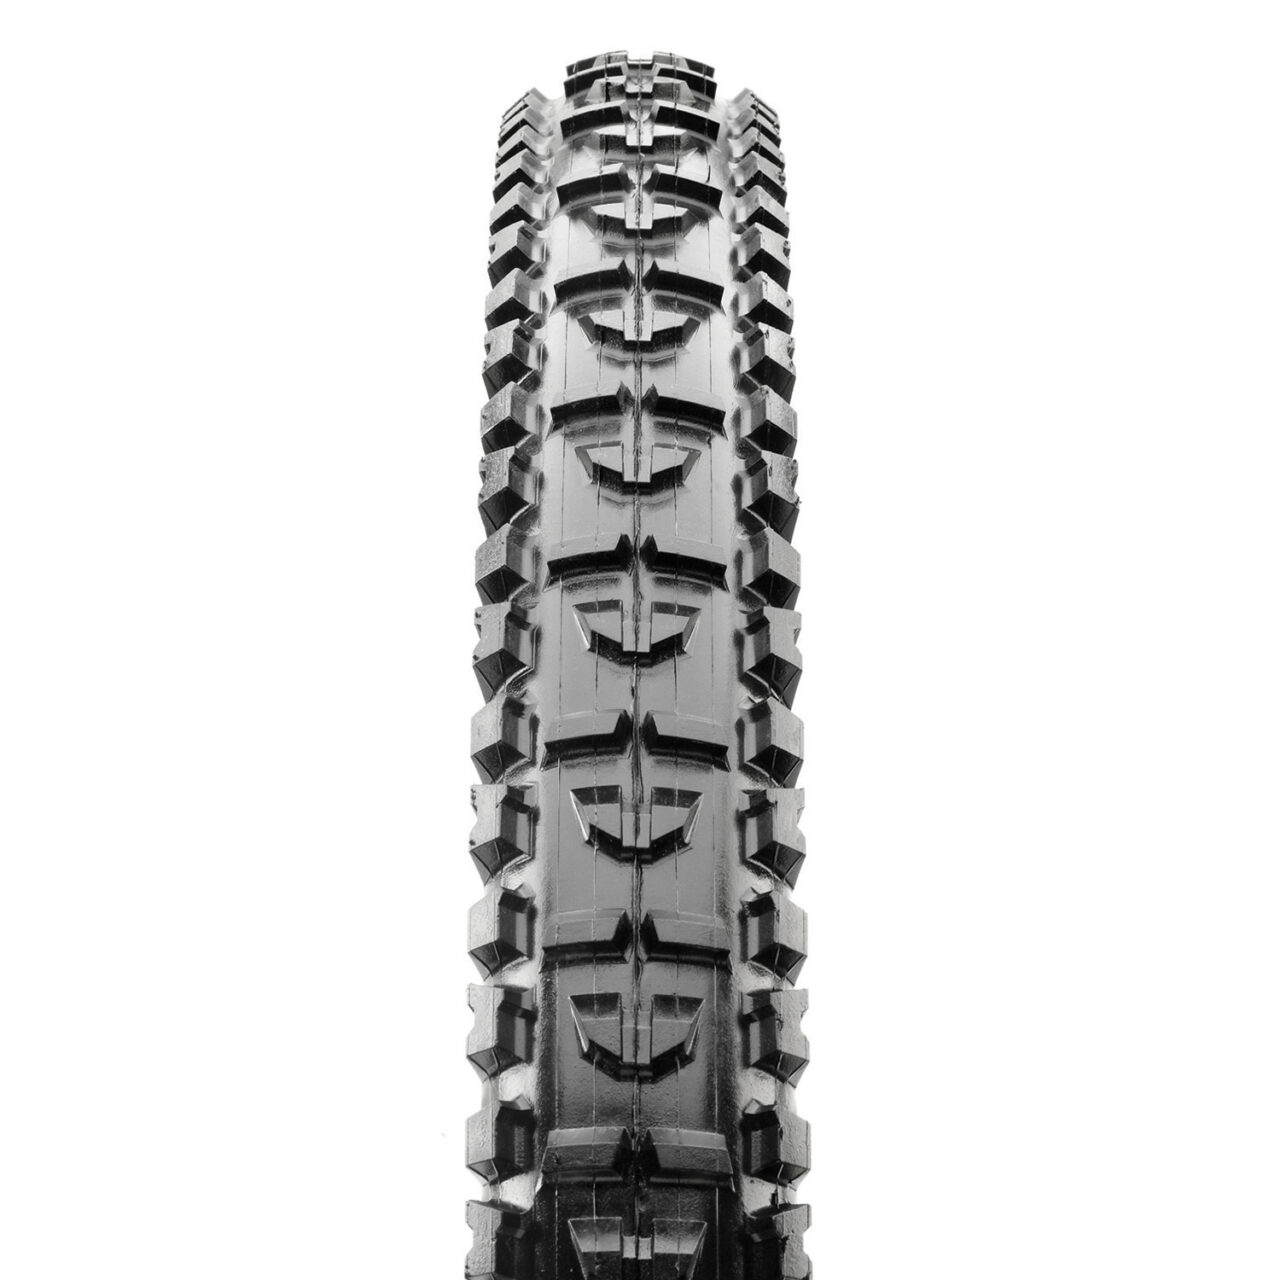 Maxxis High Roller bicycle tire tread